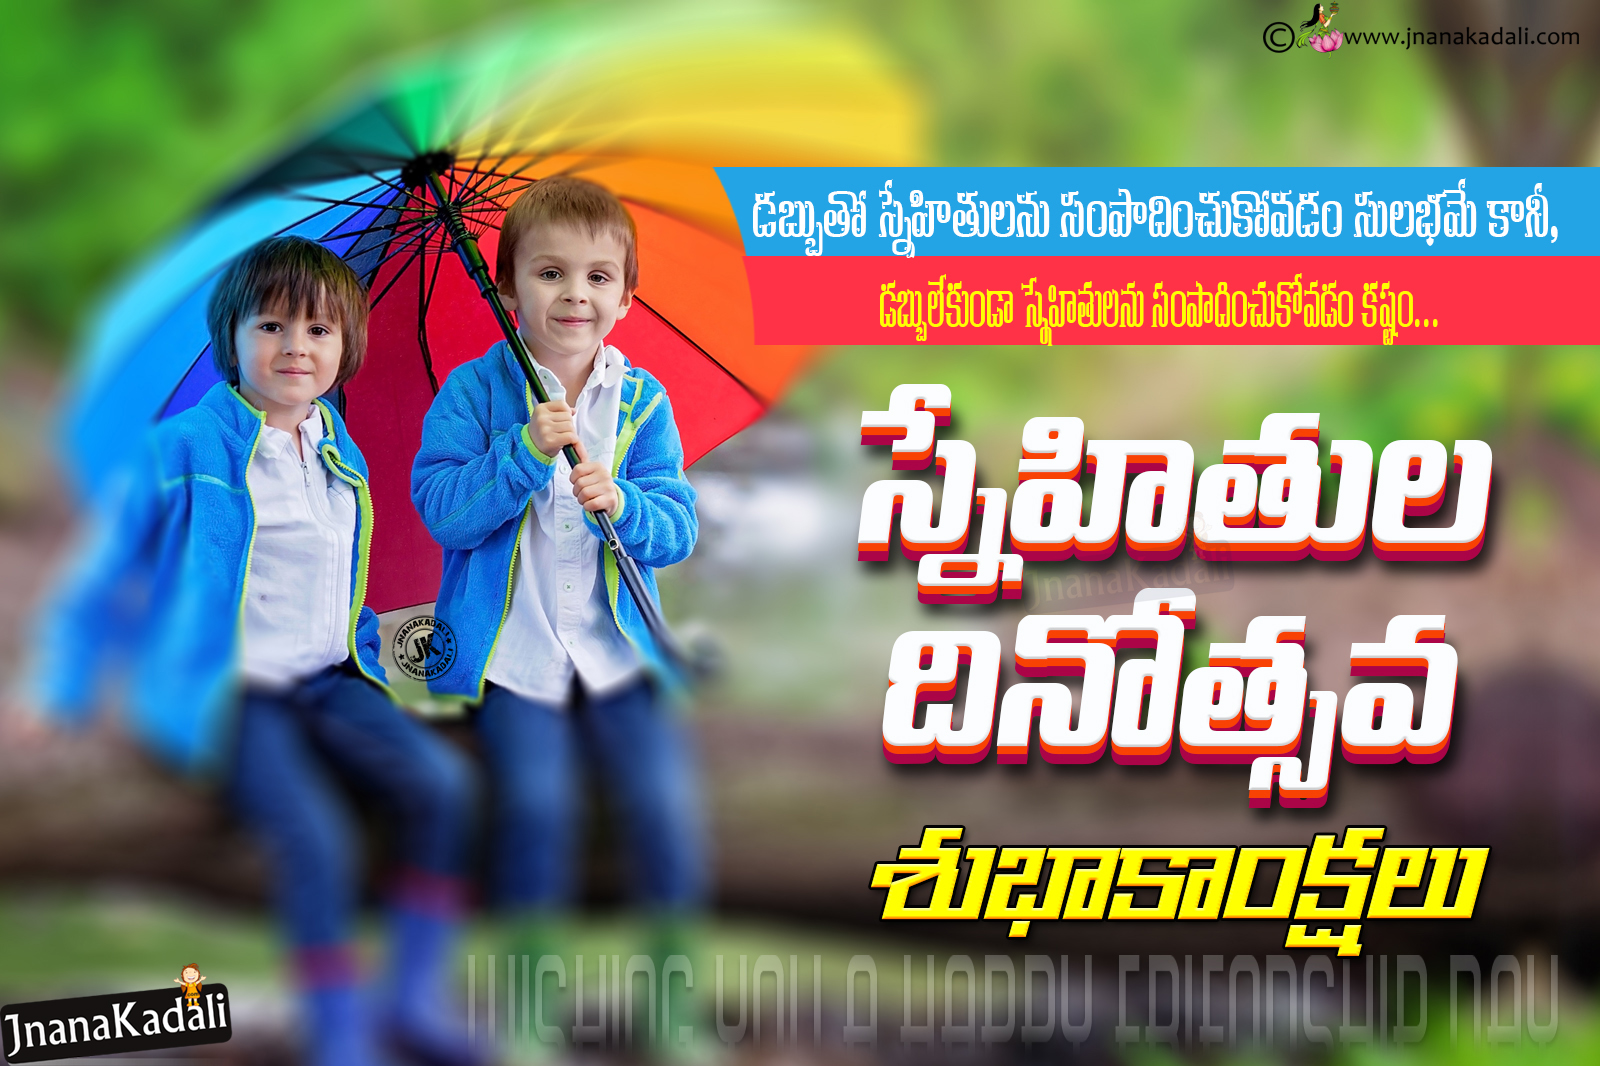 Friendship Day Greetings in Telugu With Cute Baby Friends hd ...